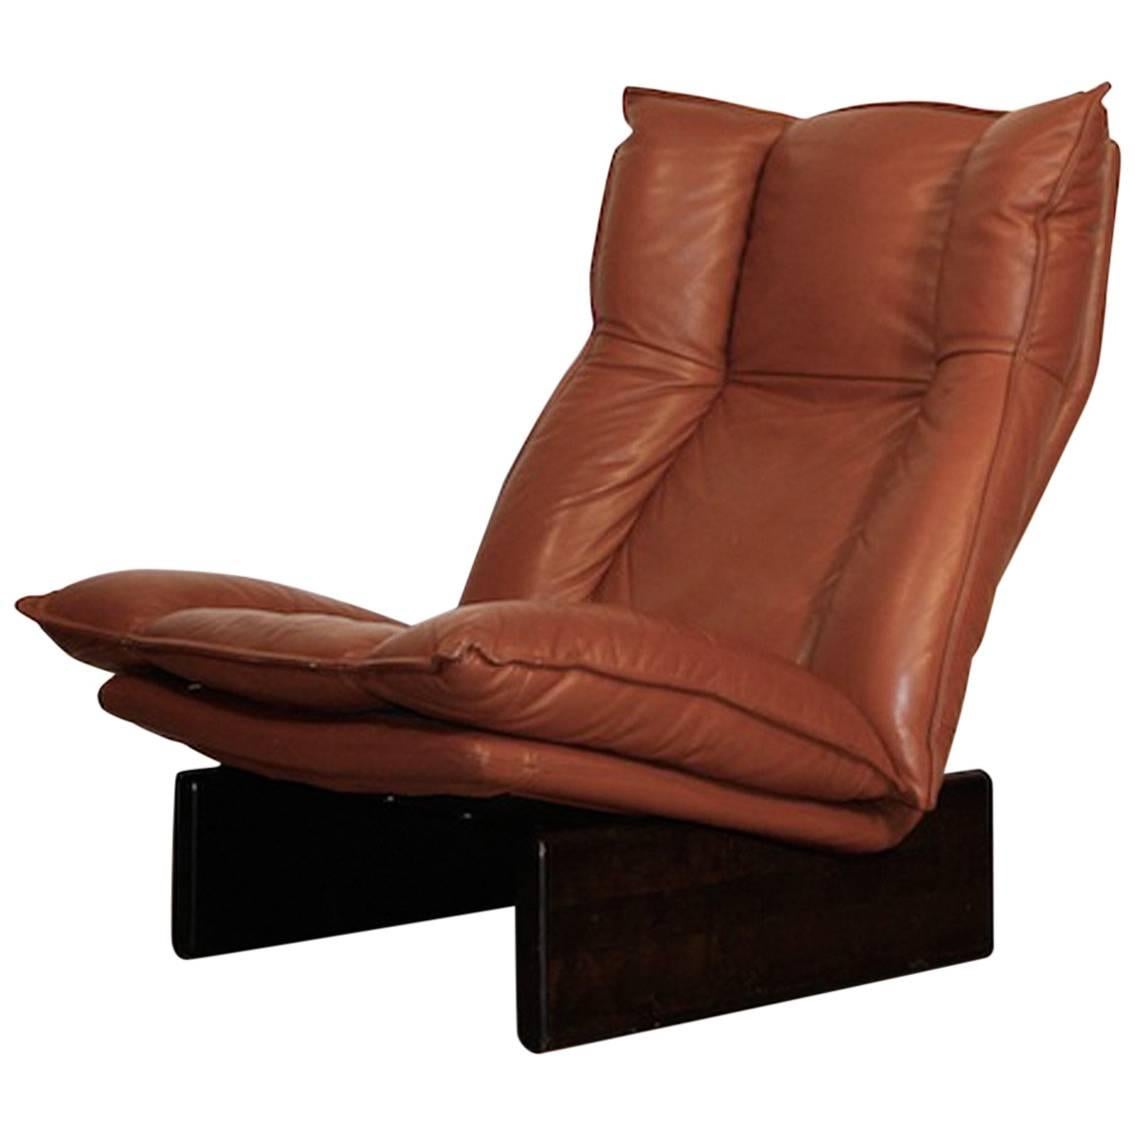 Leather Lounge Chair by Leolux, Dutch Design, 1970s For Sale